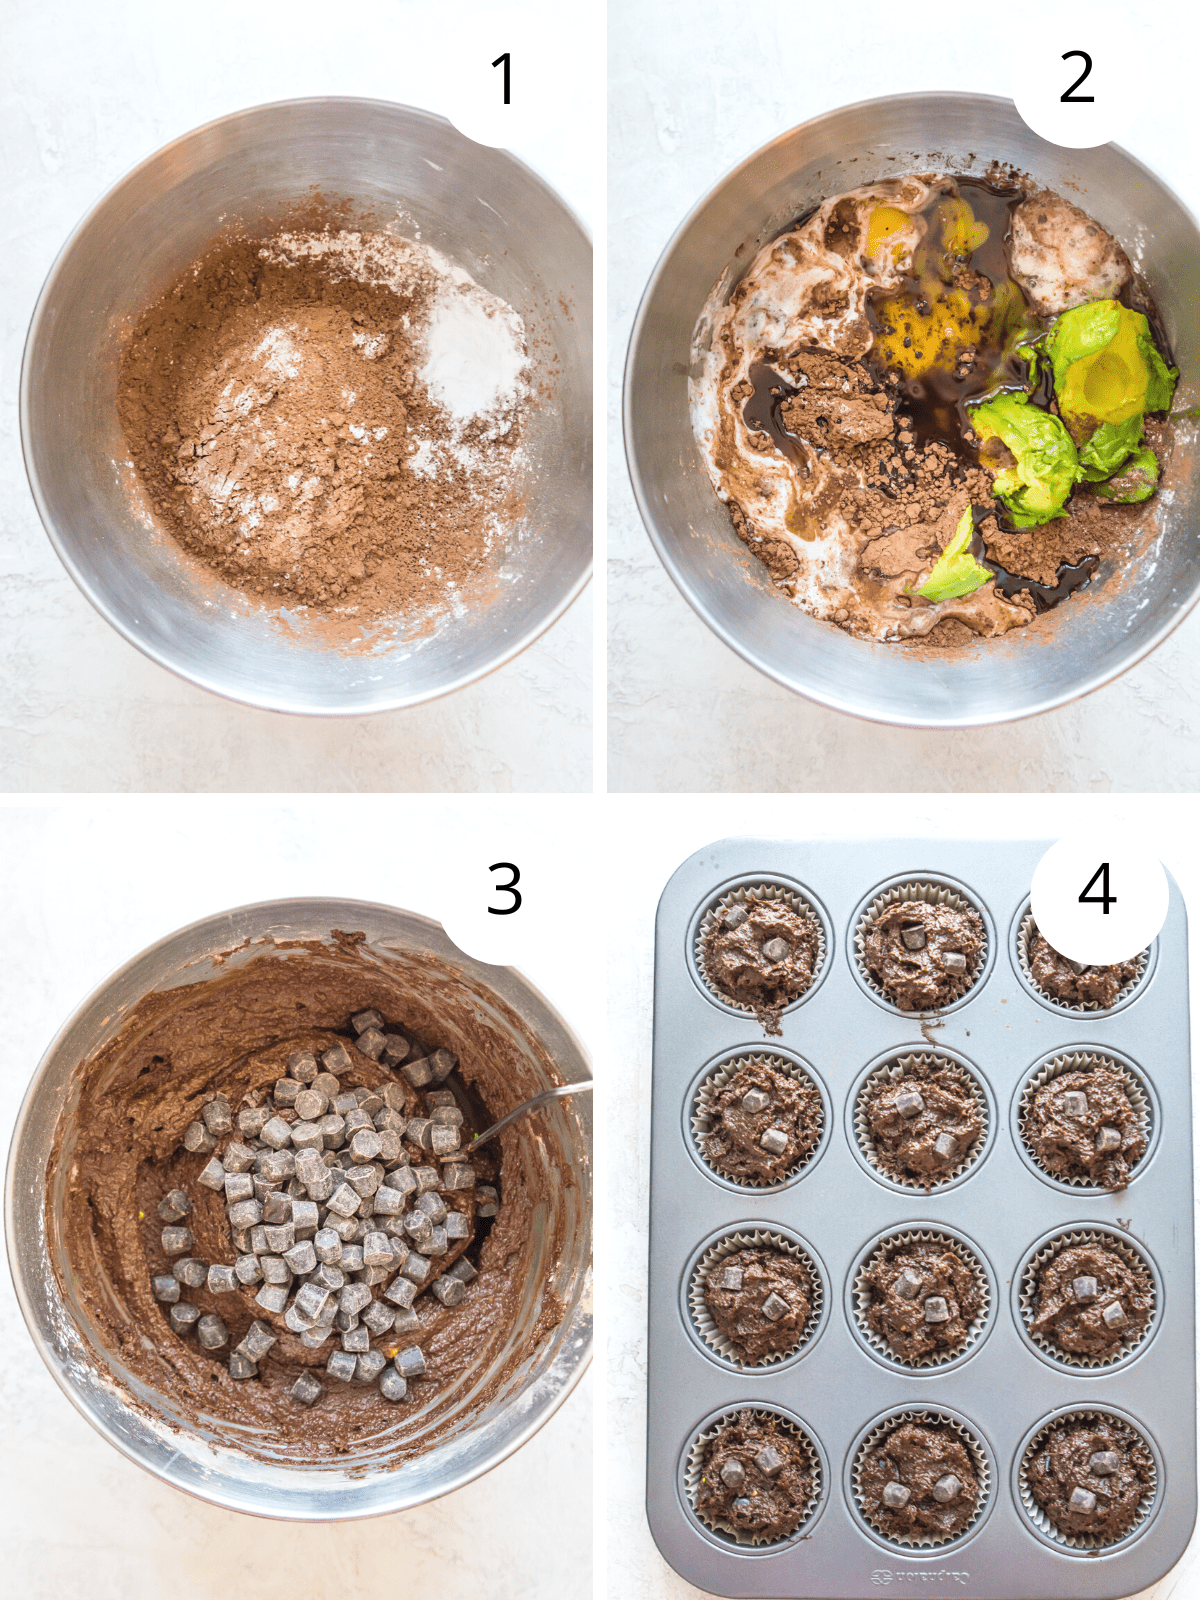 directions for making chocolate avocado muffins